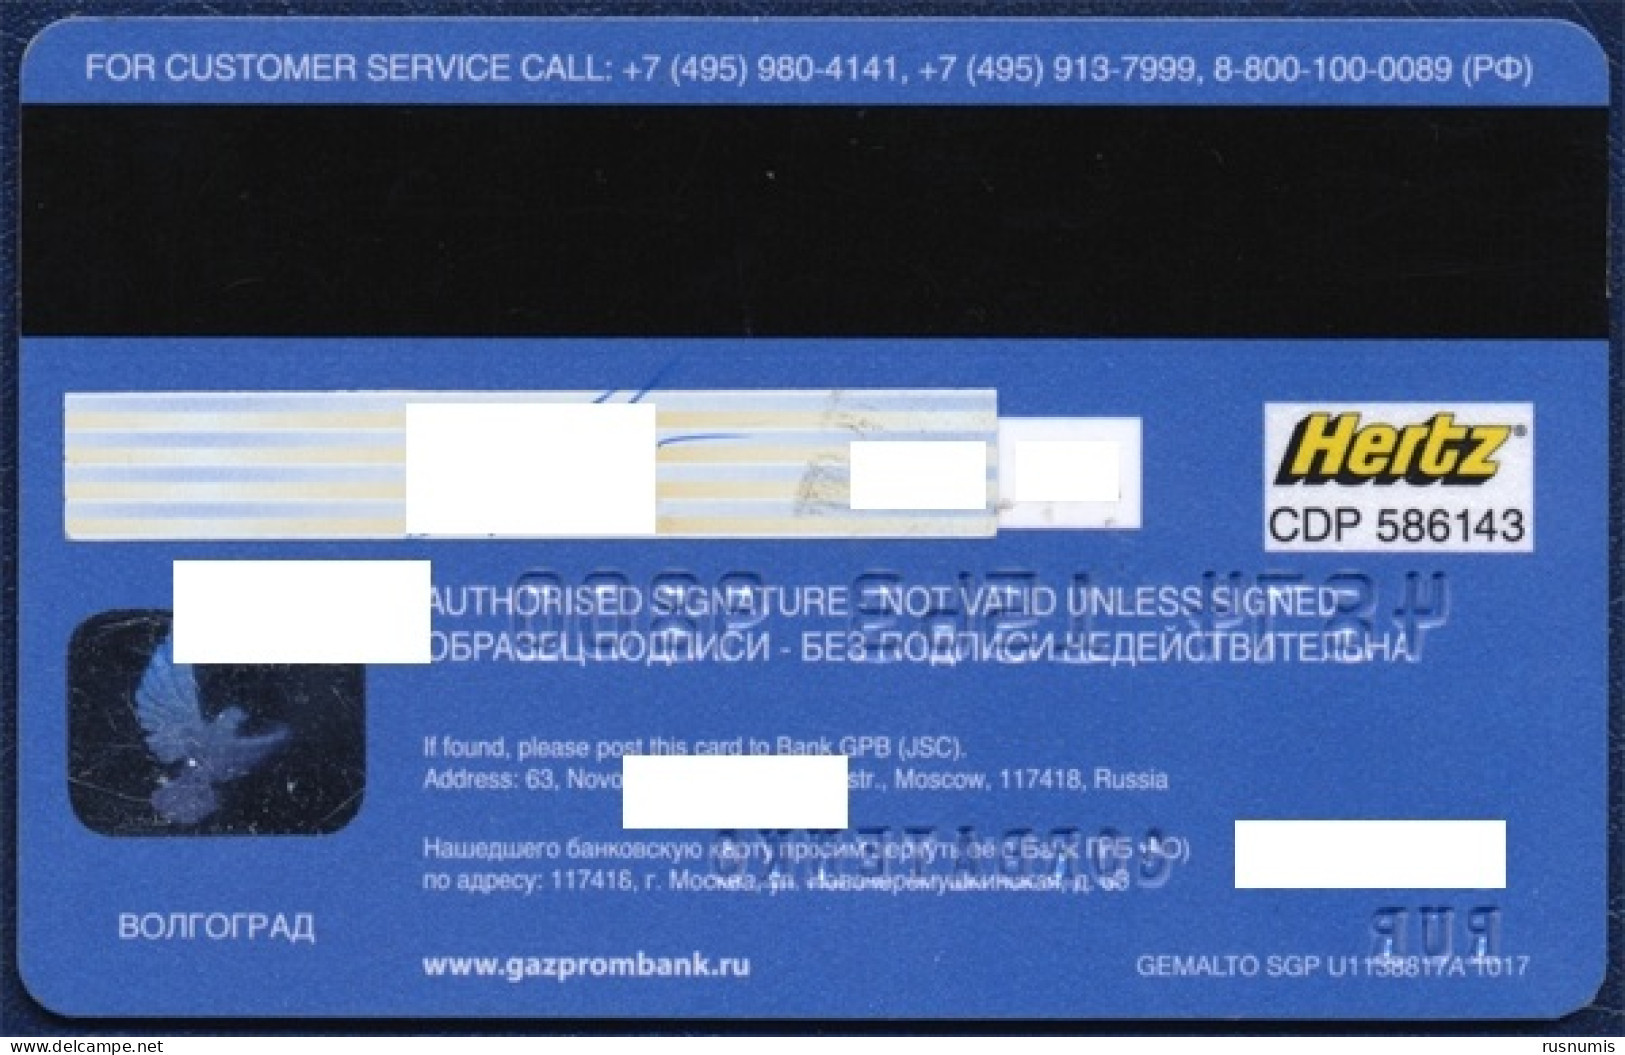 RUSSIA - RUSSIE - RUSSLAND GAZPROM BANK VISA CARD SHIP BOAT RIVER STATION EXPIRED - Credit Cards (Exp. Date Min. 10 Years)